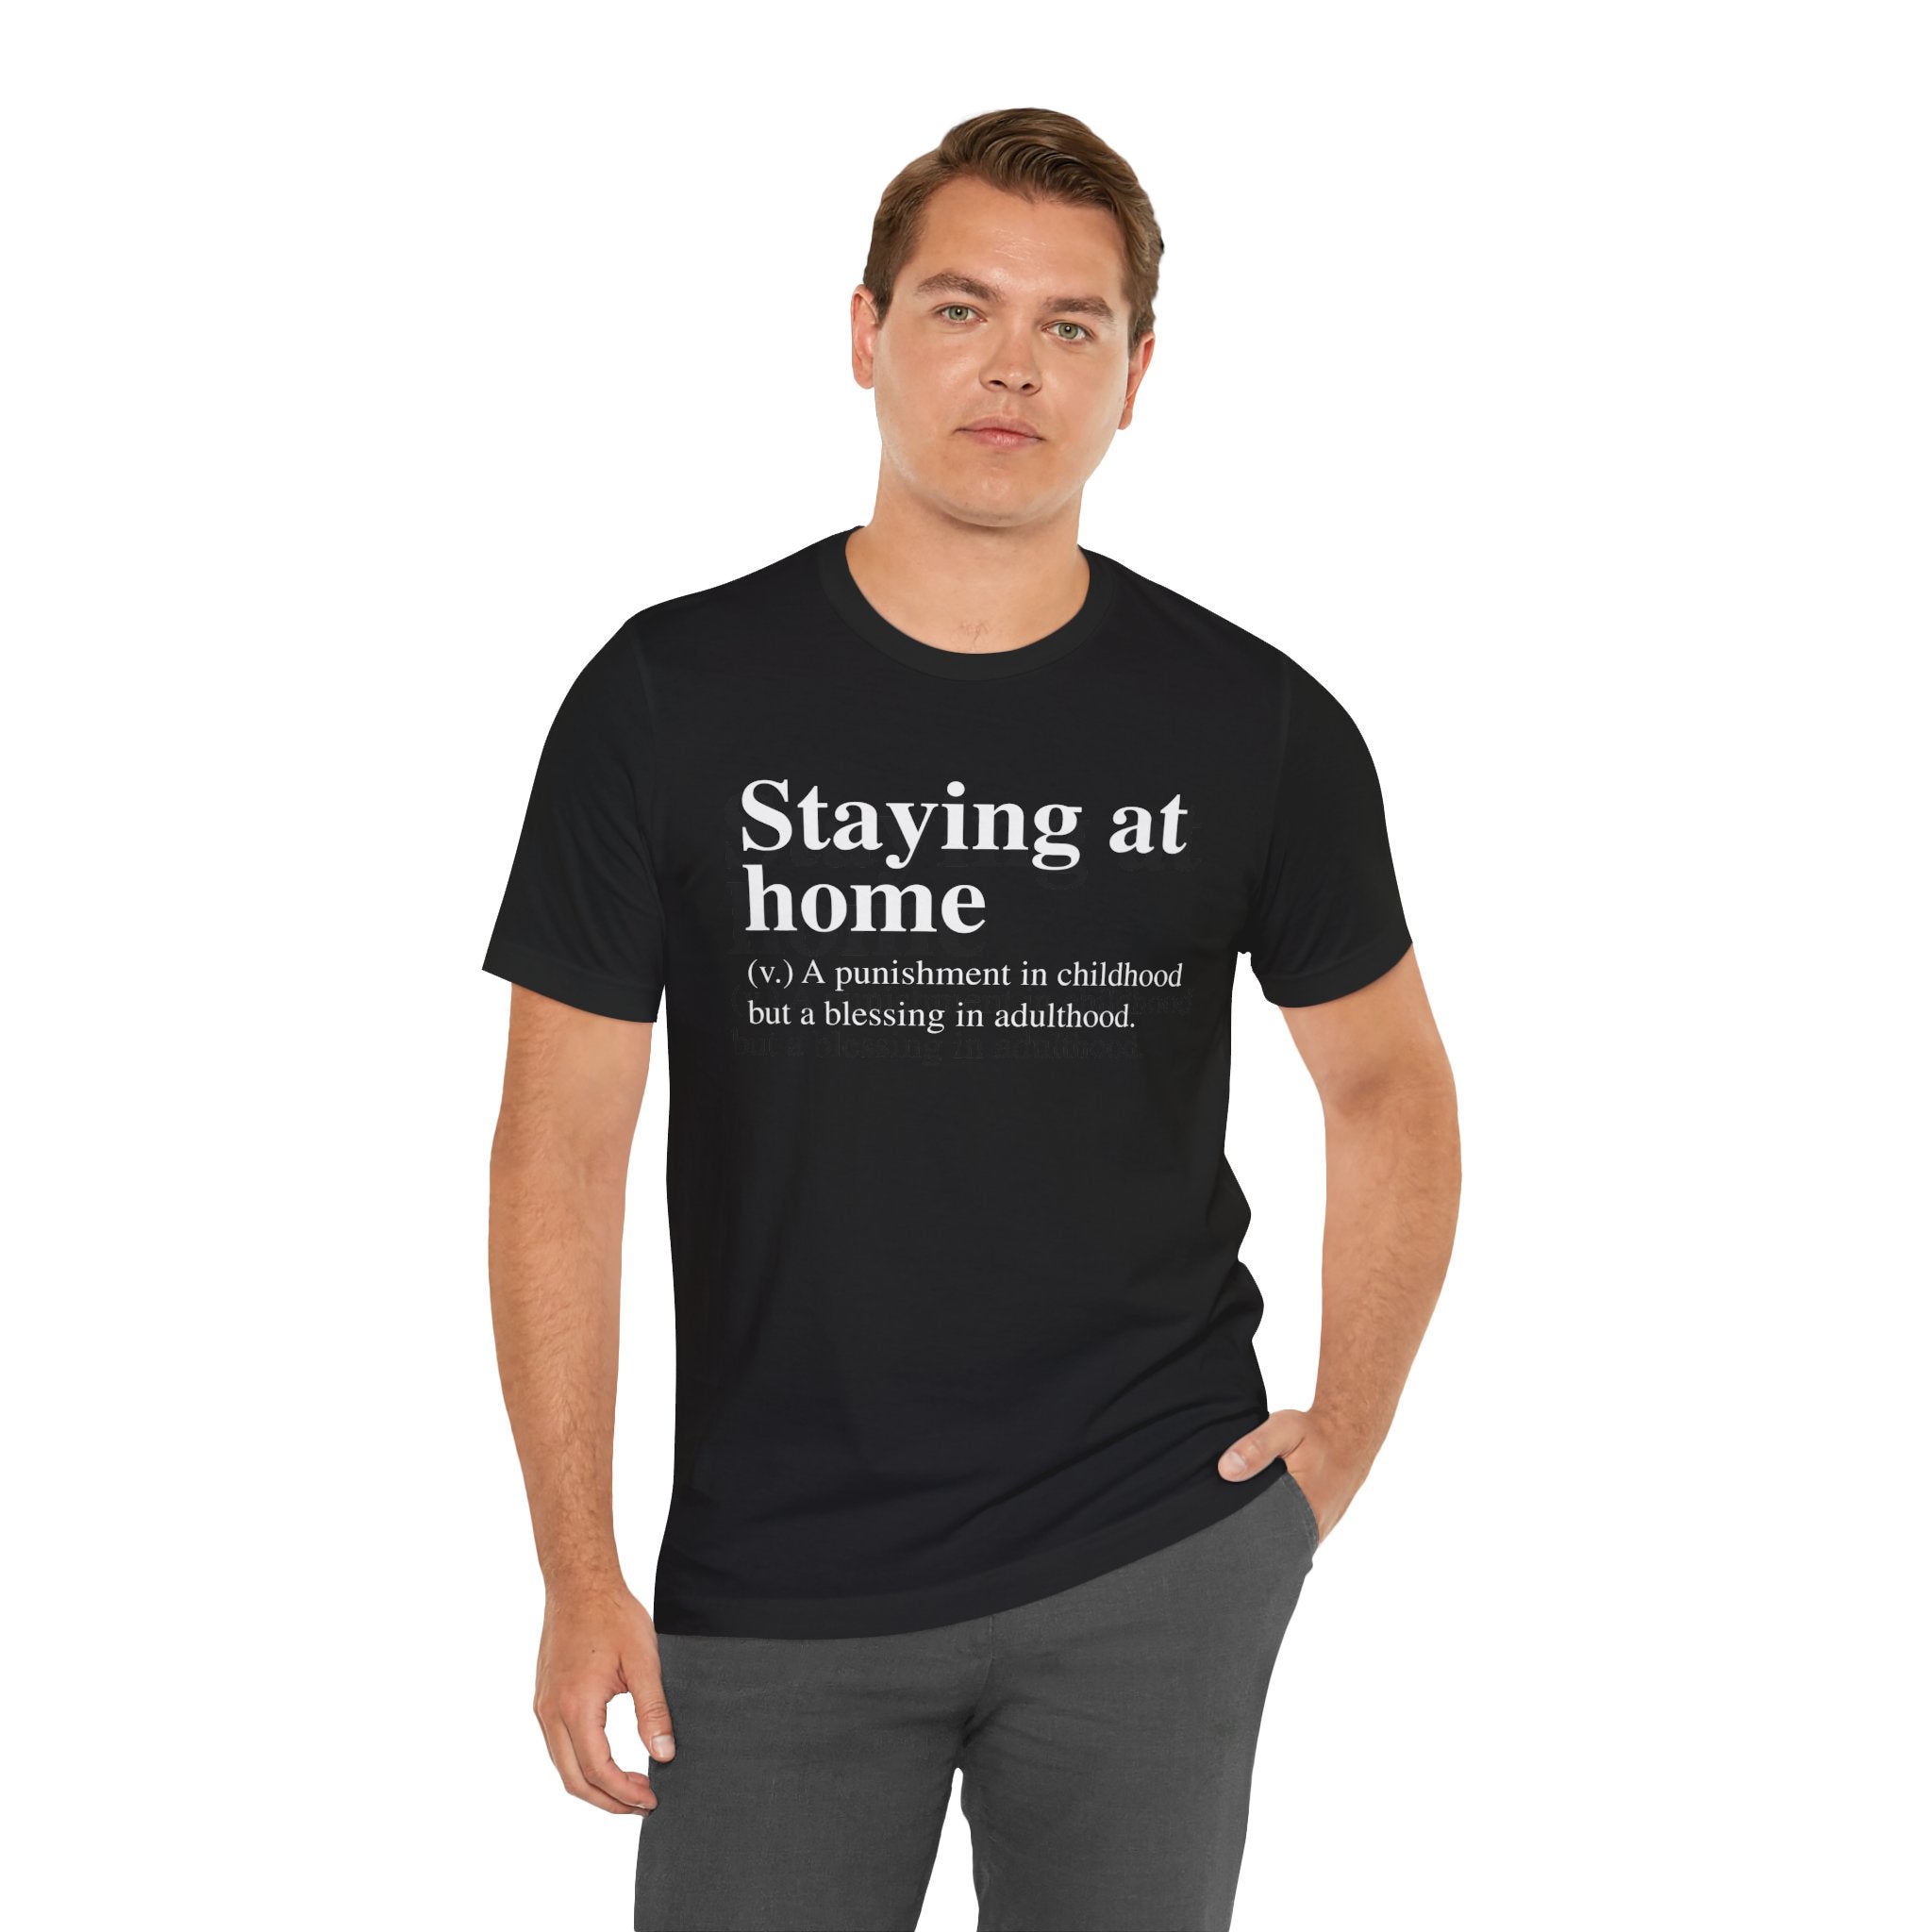 Man in black Staying at Home T-Shirt with text "staying home—a punishment in childhood but a blessing in adulthood.